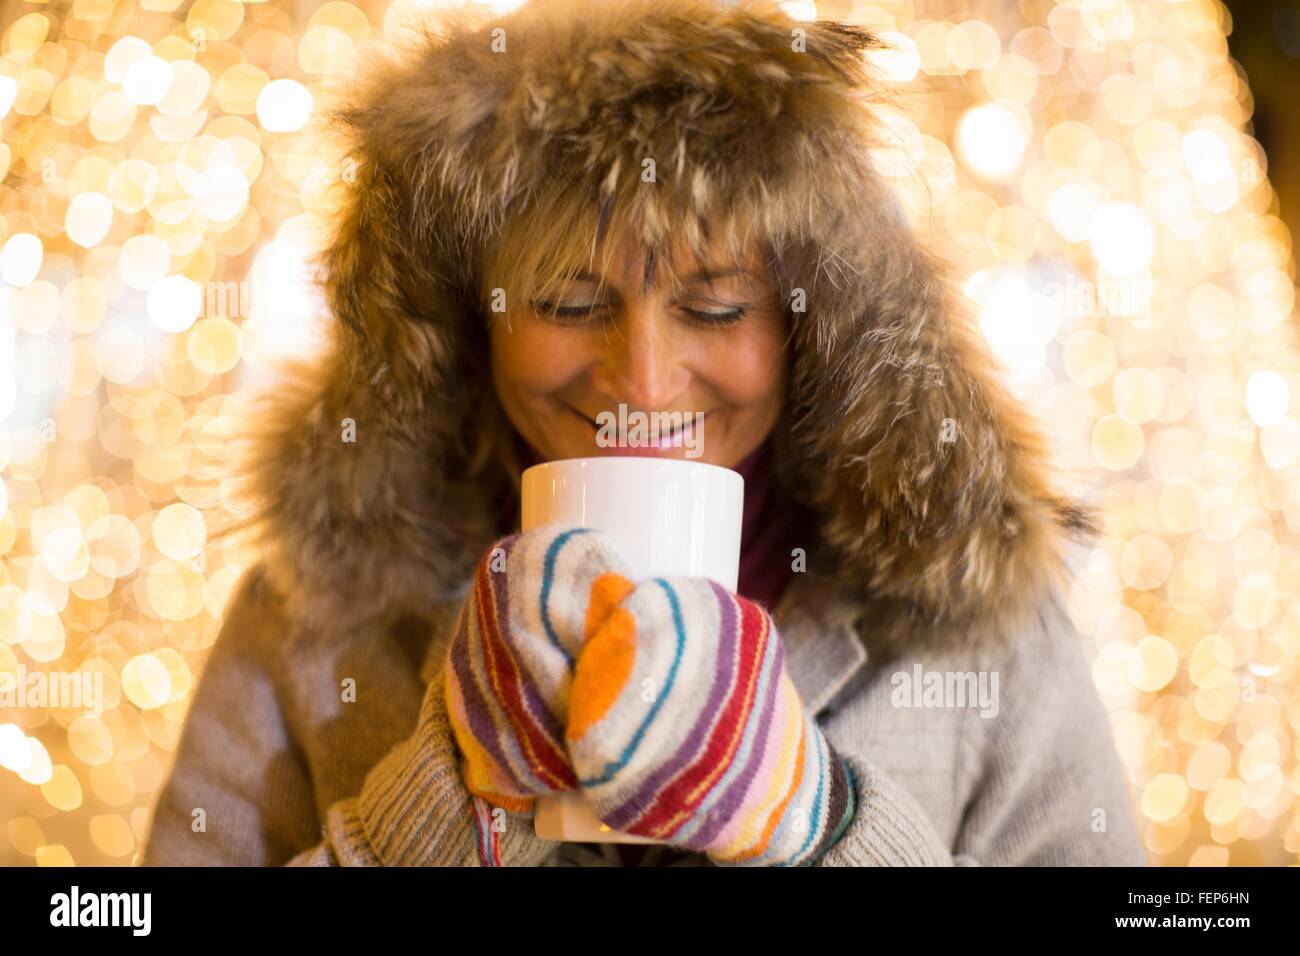 Mature woman wearing furry hood and mittens holding hot drink in front of xmas lights Stock Photo